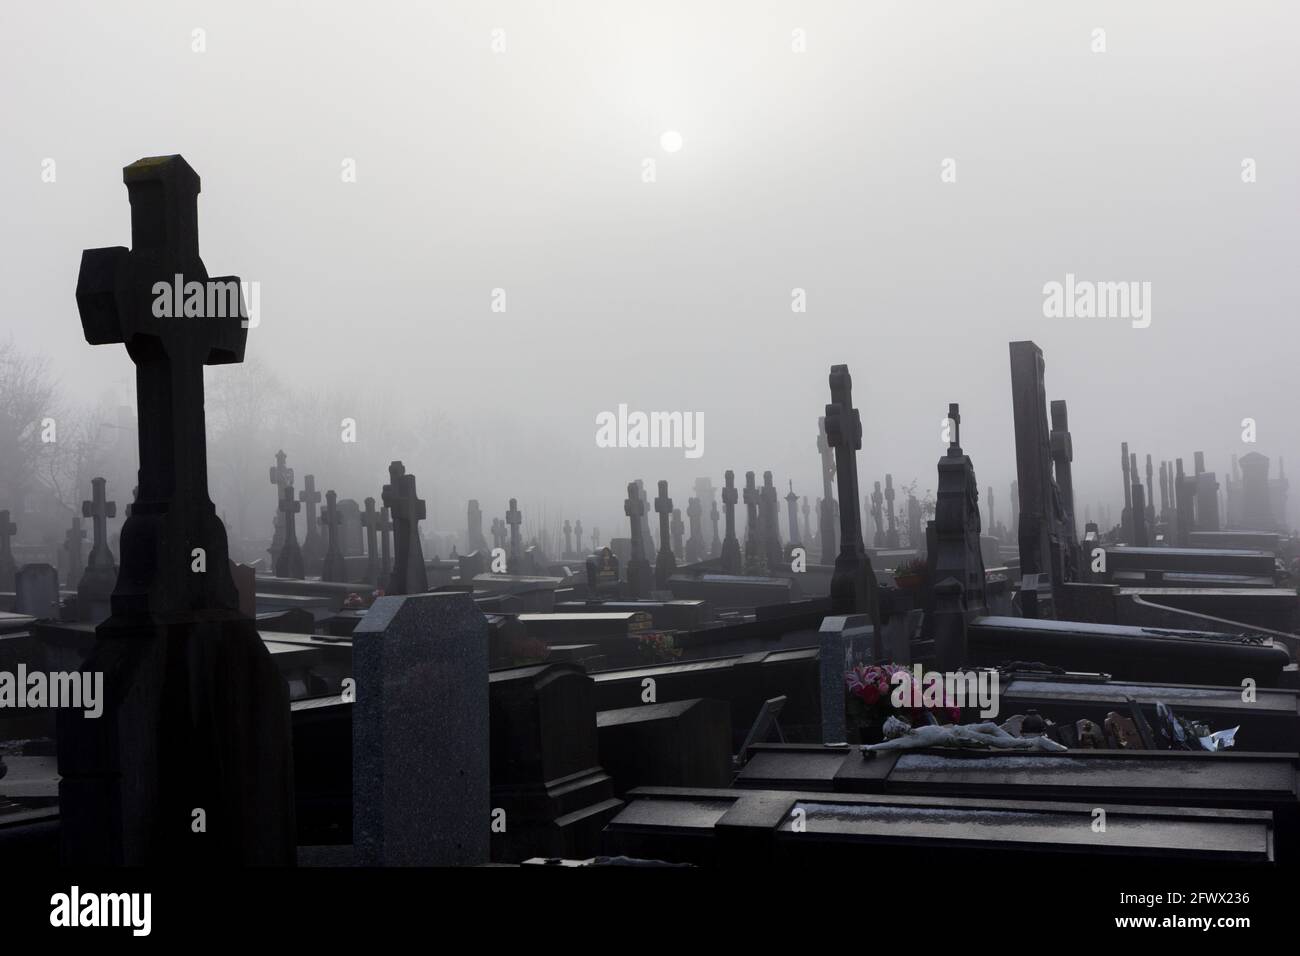 Valenciennes, France, 2017/01/02. Tombs with crosses in the fog at Saint Roch cemetery. Stock Photo